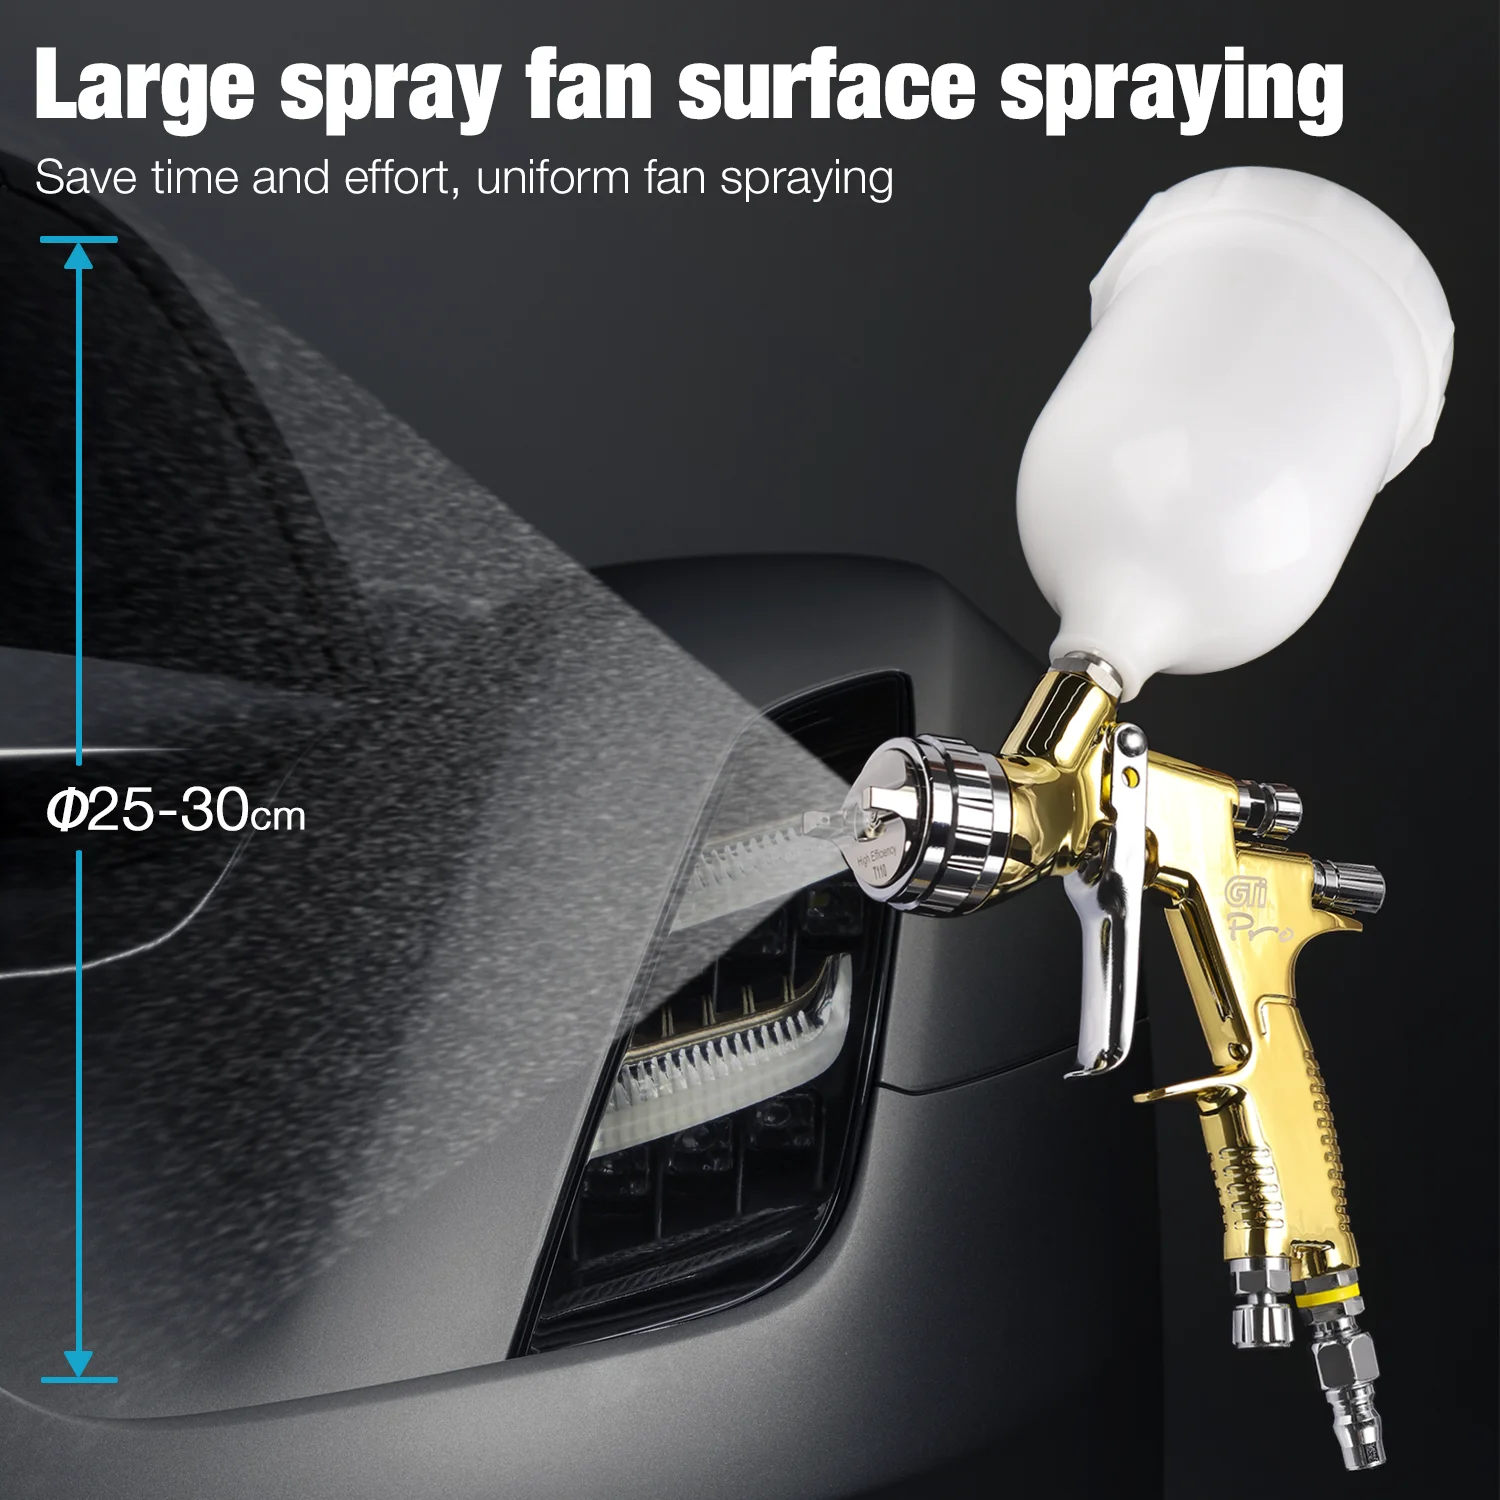 New High Quality Spray  GTI Pro 1.m Nozzle Painting  High Atomization Paint  Wat - £150.49 GBP